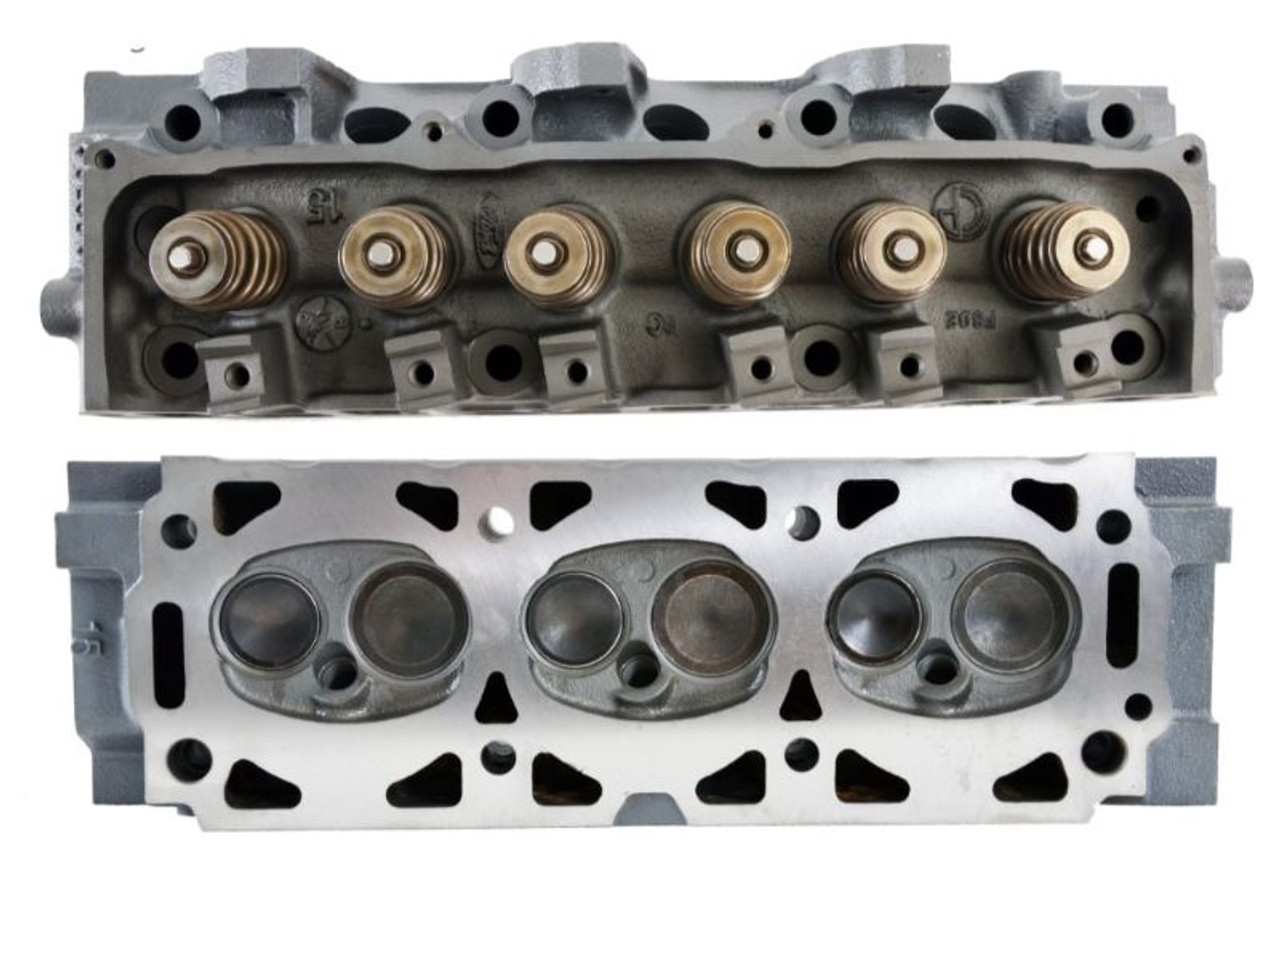 Cylinder Head Assembly - 2000 Ford Windstar 3.0L (CH1027R.A10)